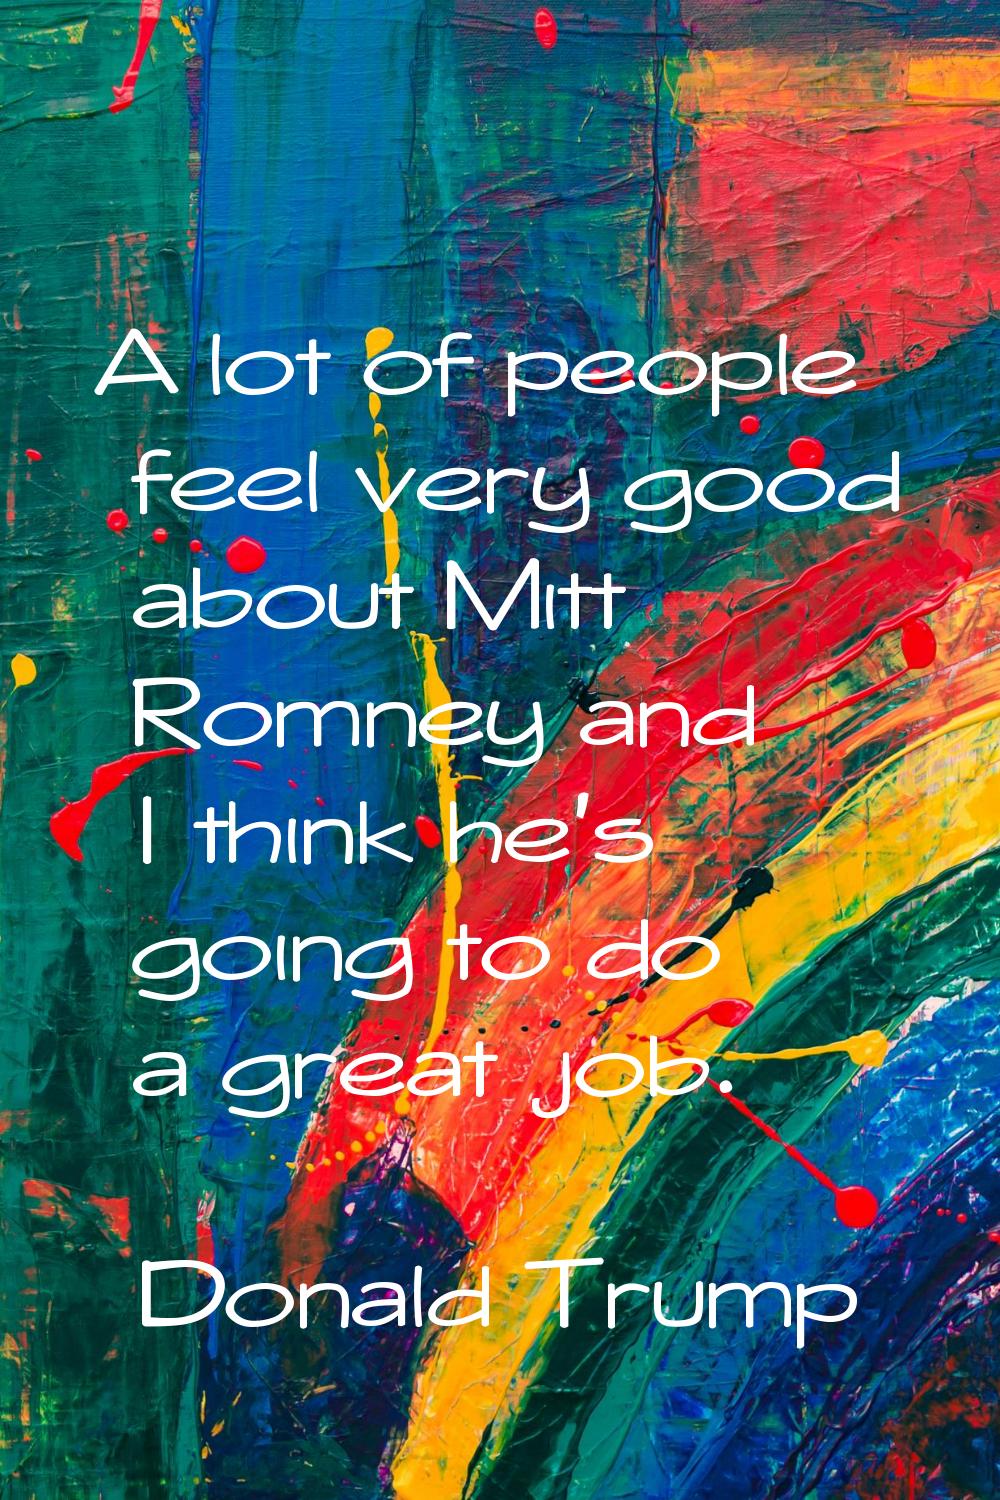 A lot of people feel very good about Mitt Romney and I think he's going to do a great job.